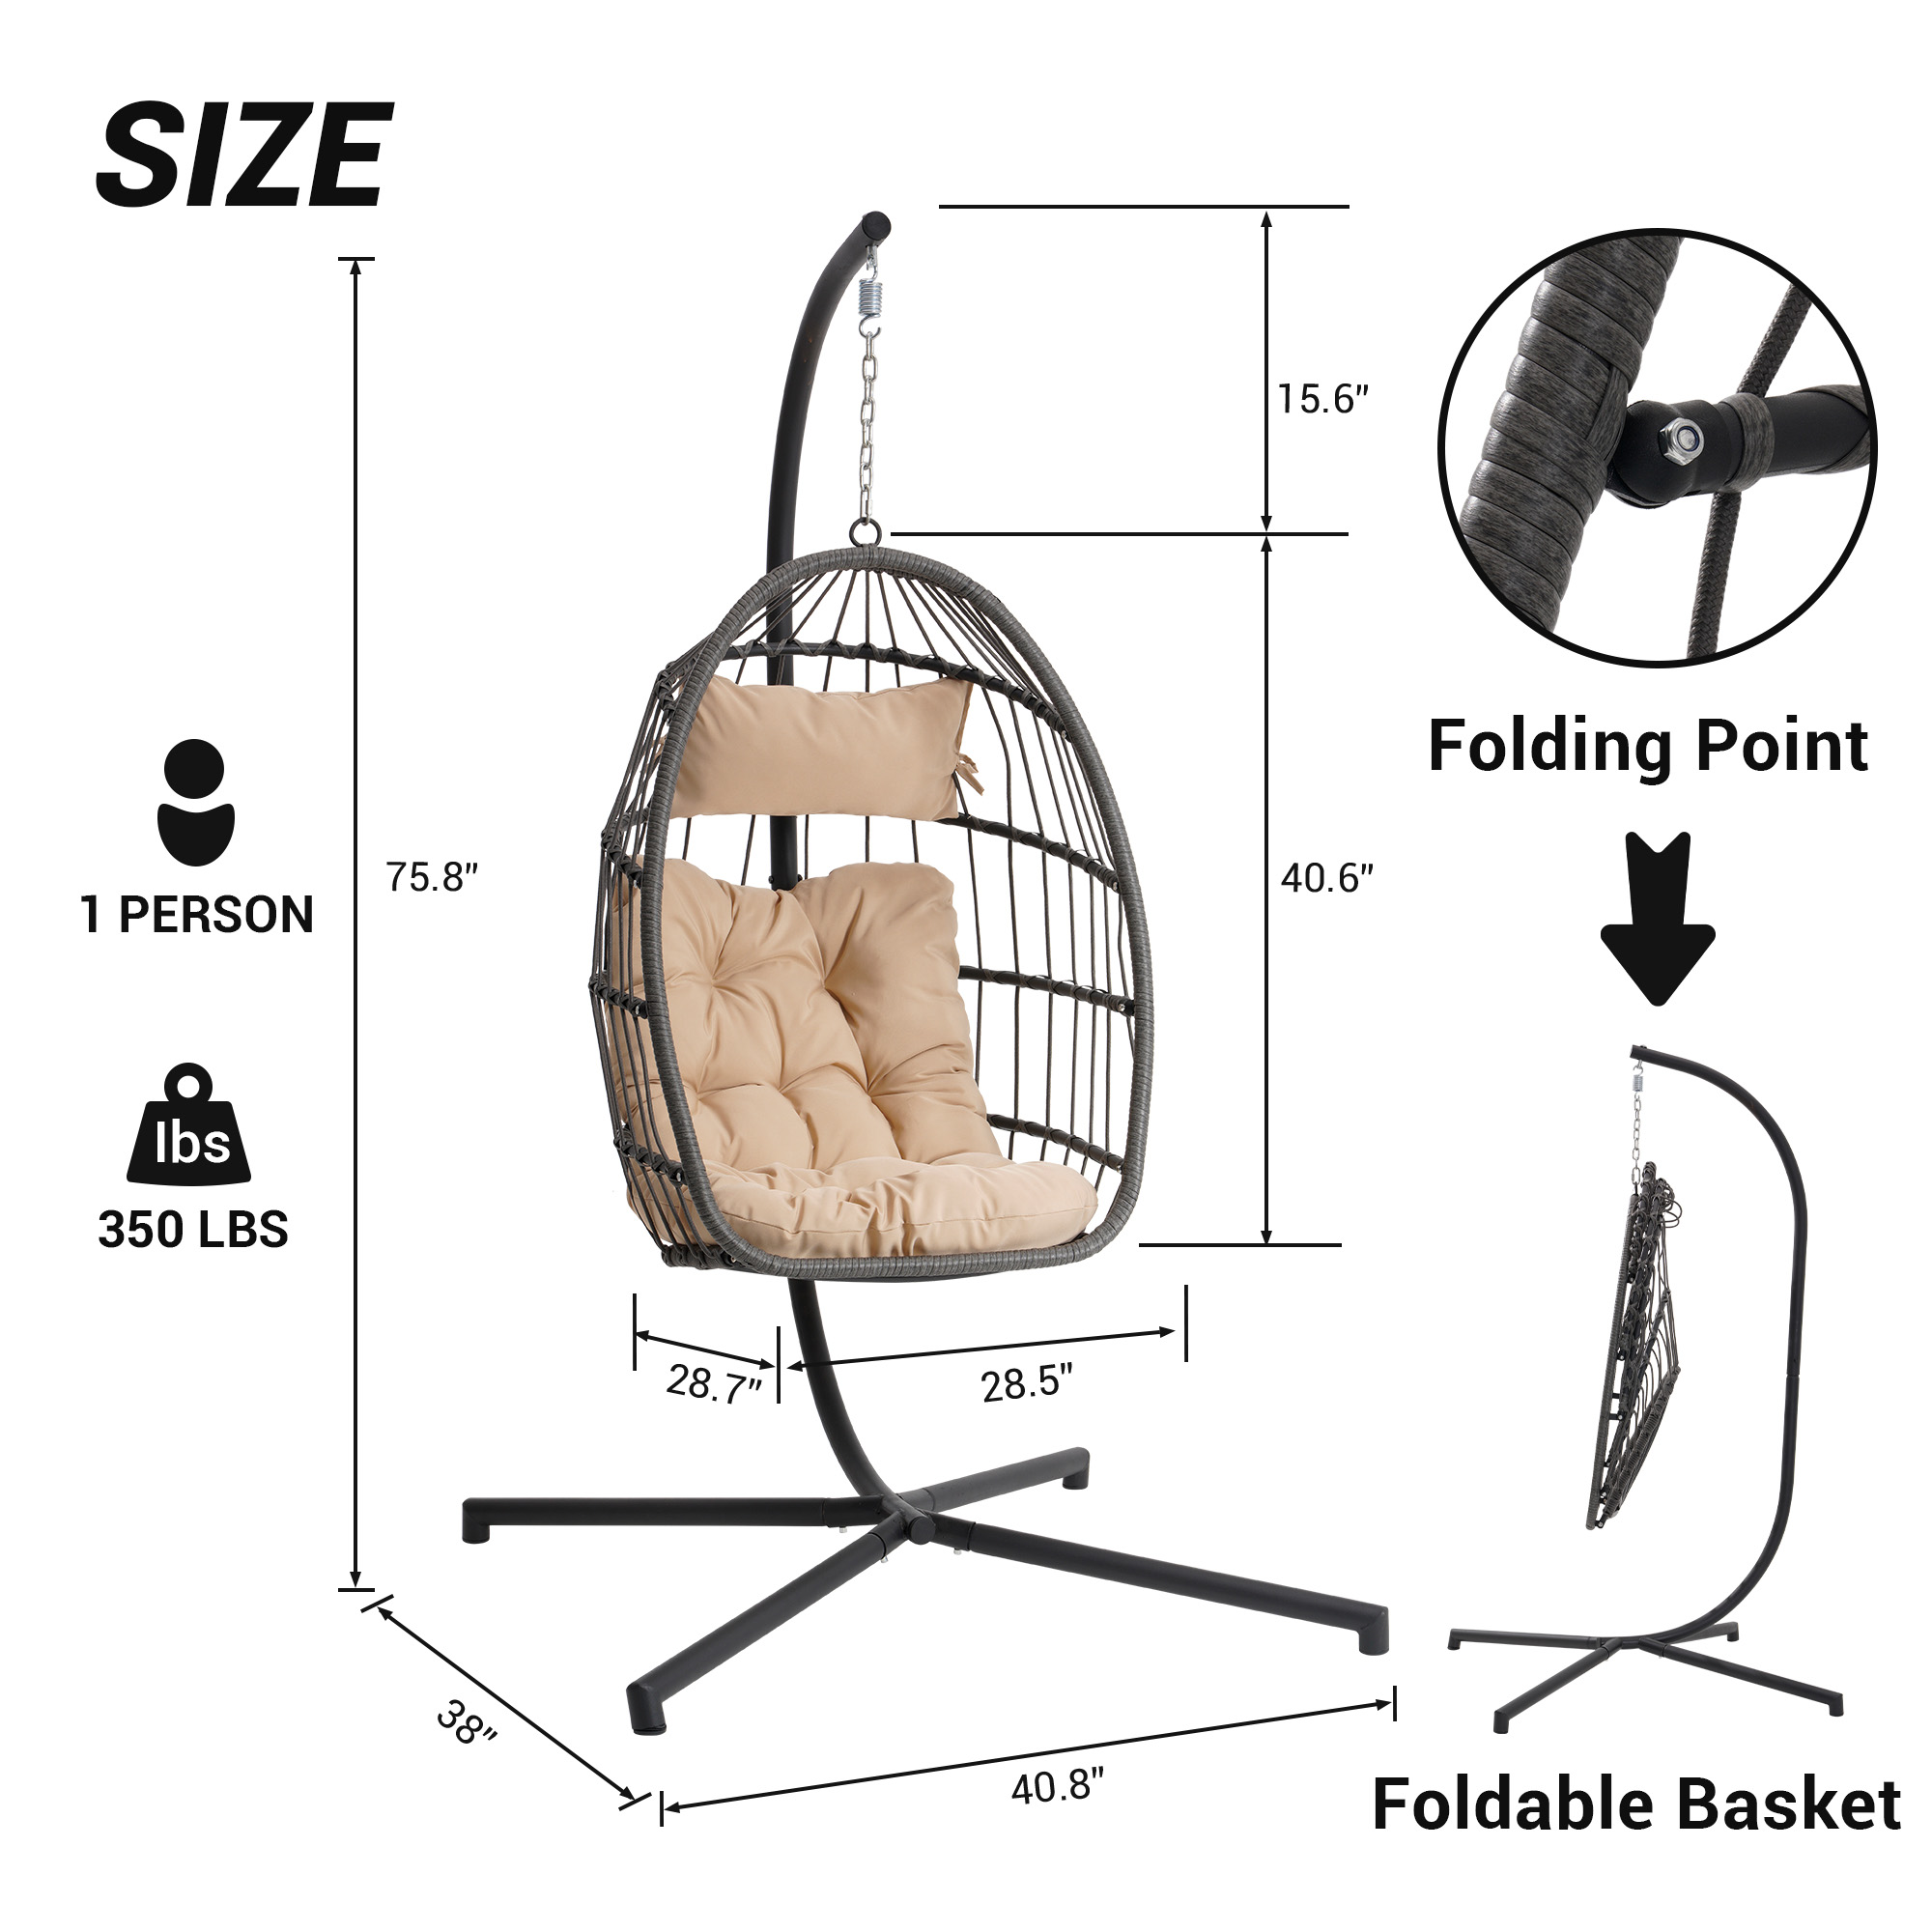 Wicker Swing Chair, BTMWAY Patio Foldable Egg Chair with Stand and Cushions, Outdoor All-weather Rattan Hammock Egg Chair Folding Hanging Chair for Balcony Backyard Garden Poolside, Holds 380lb, Beige - image 4 of 4